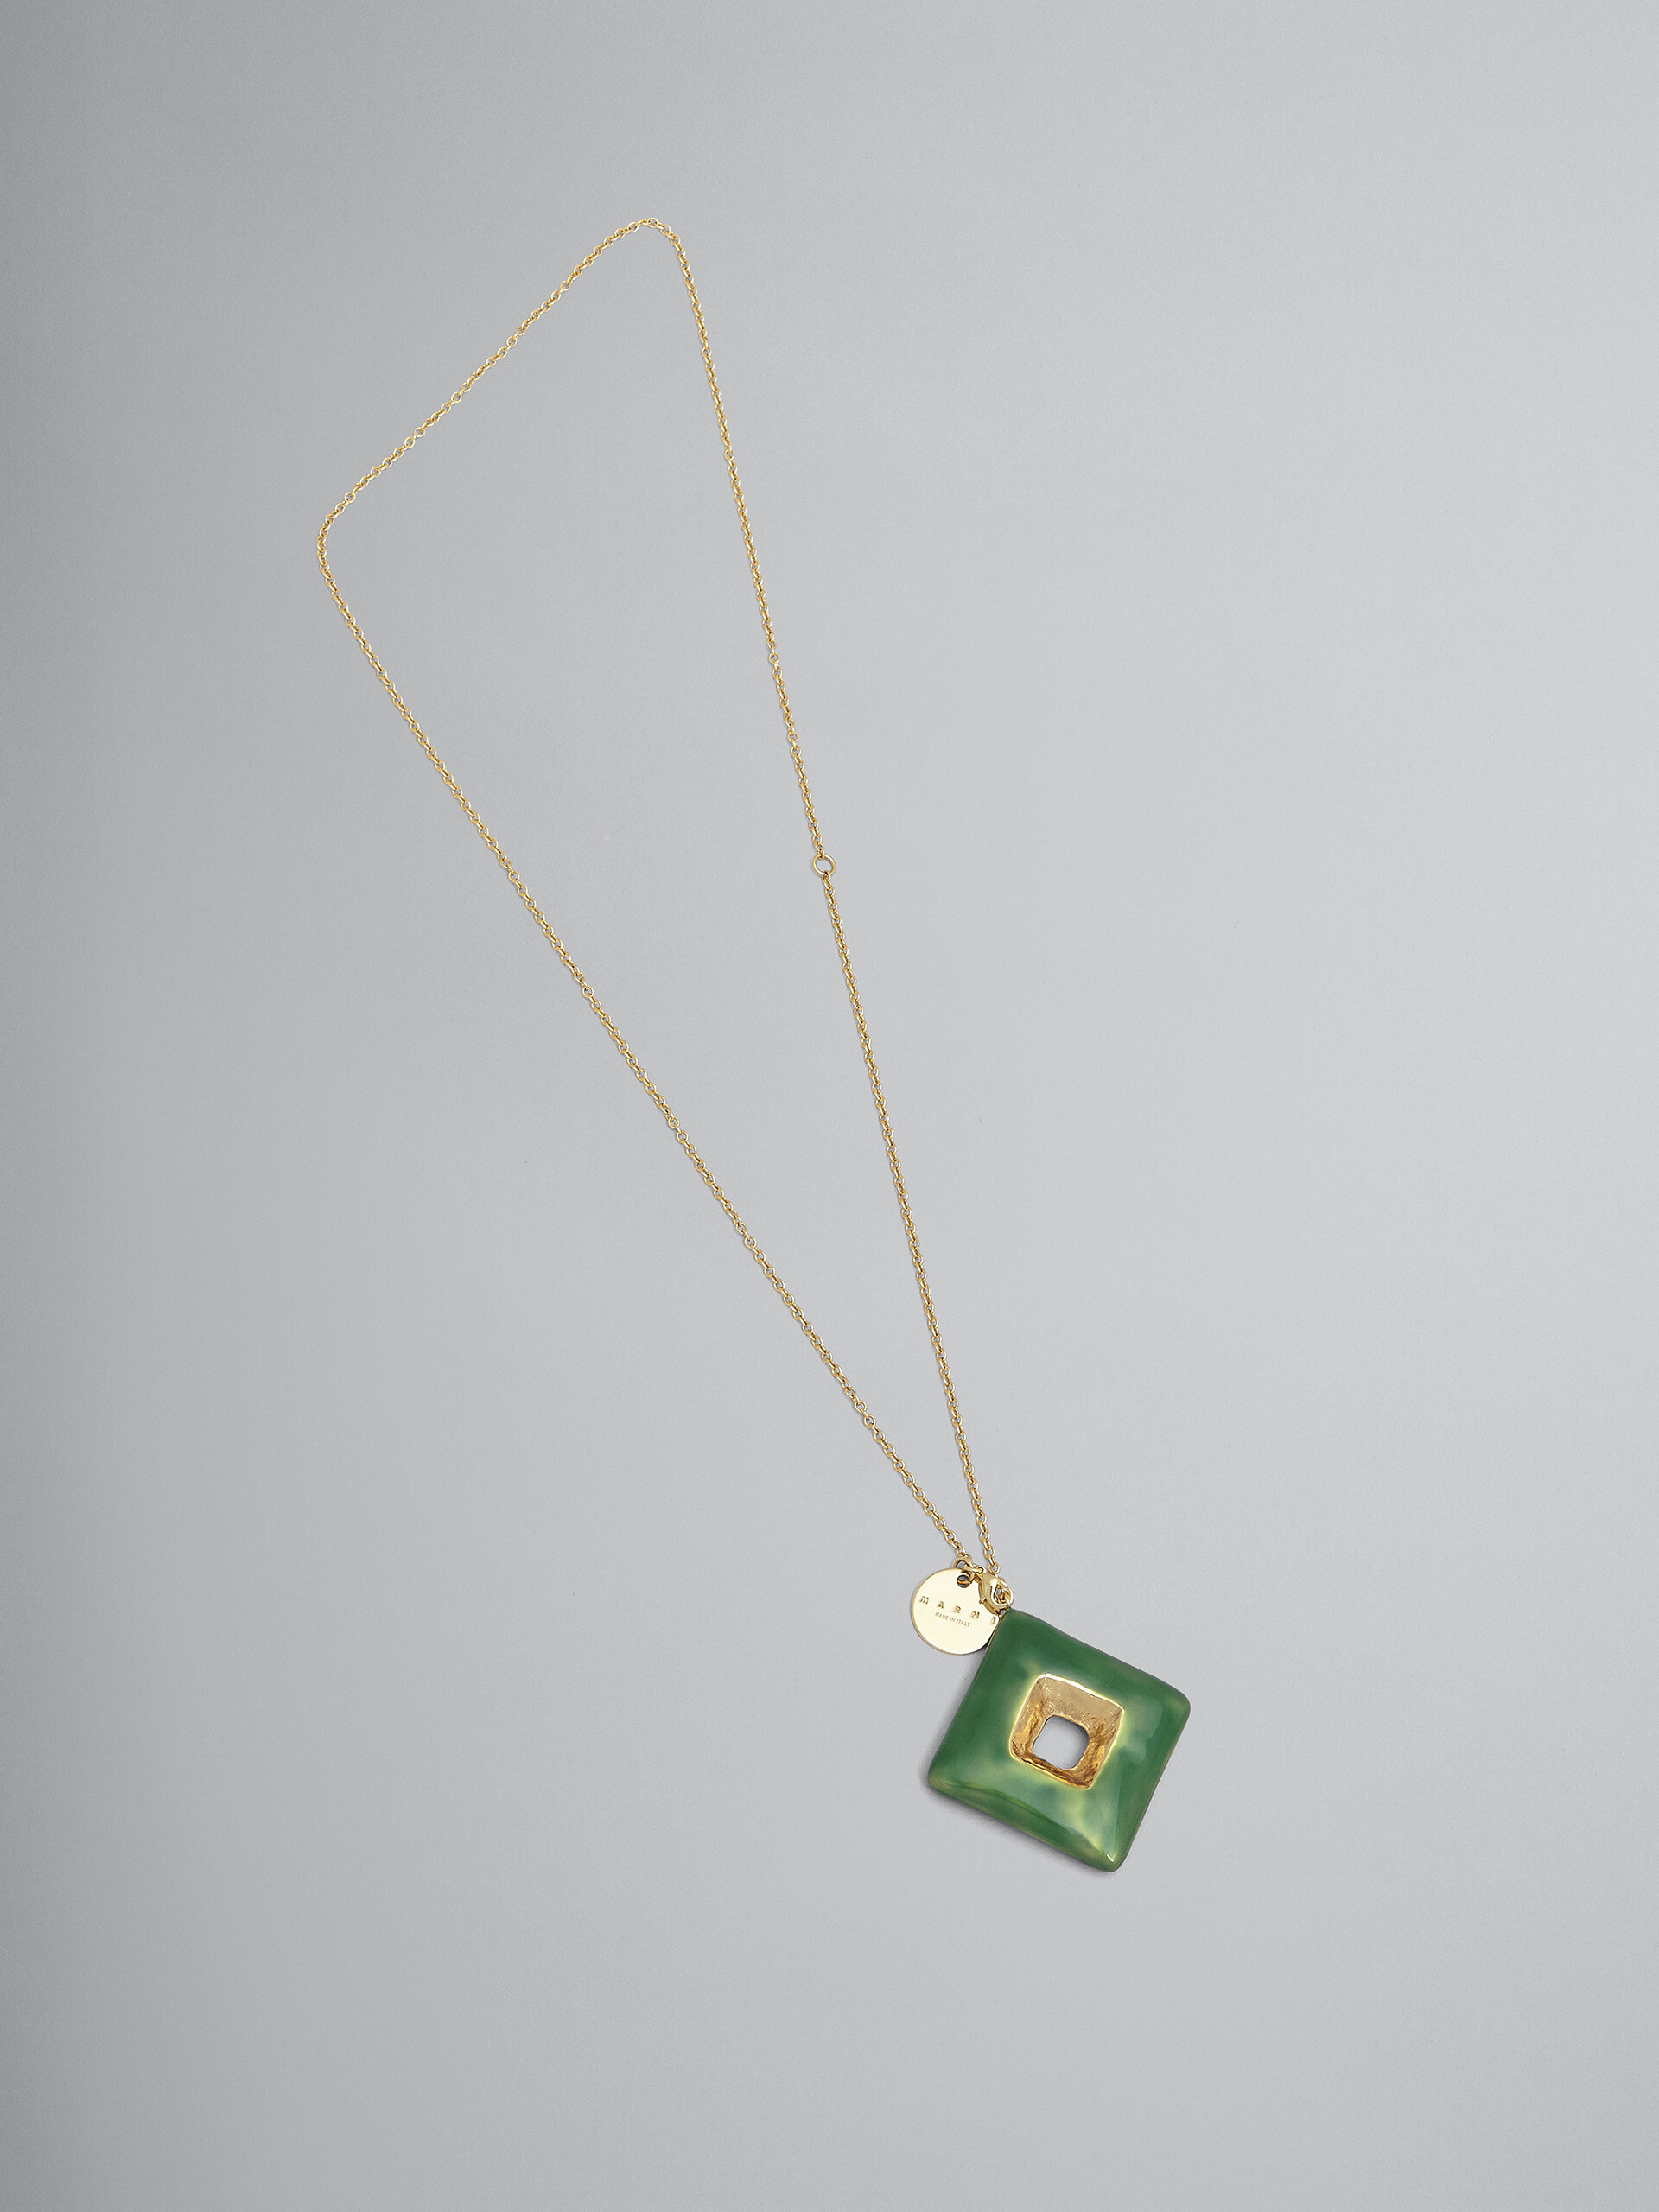 TRAPEZE green necklace - Necklaces - Image 1